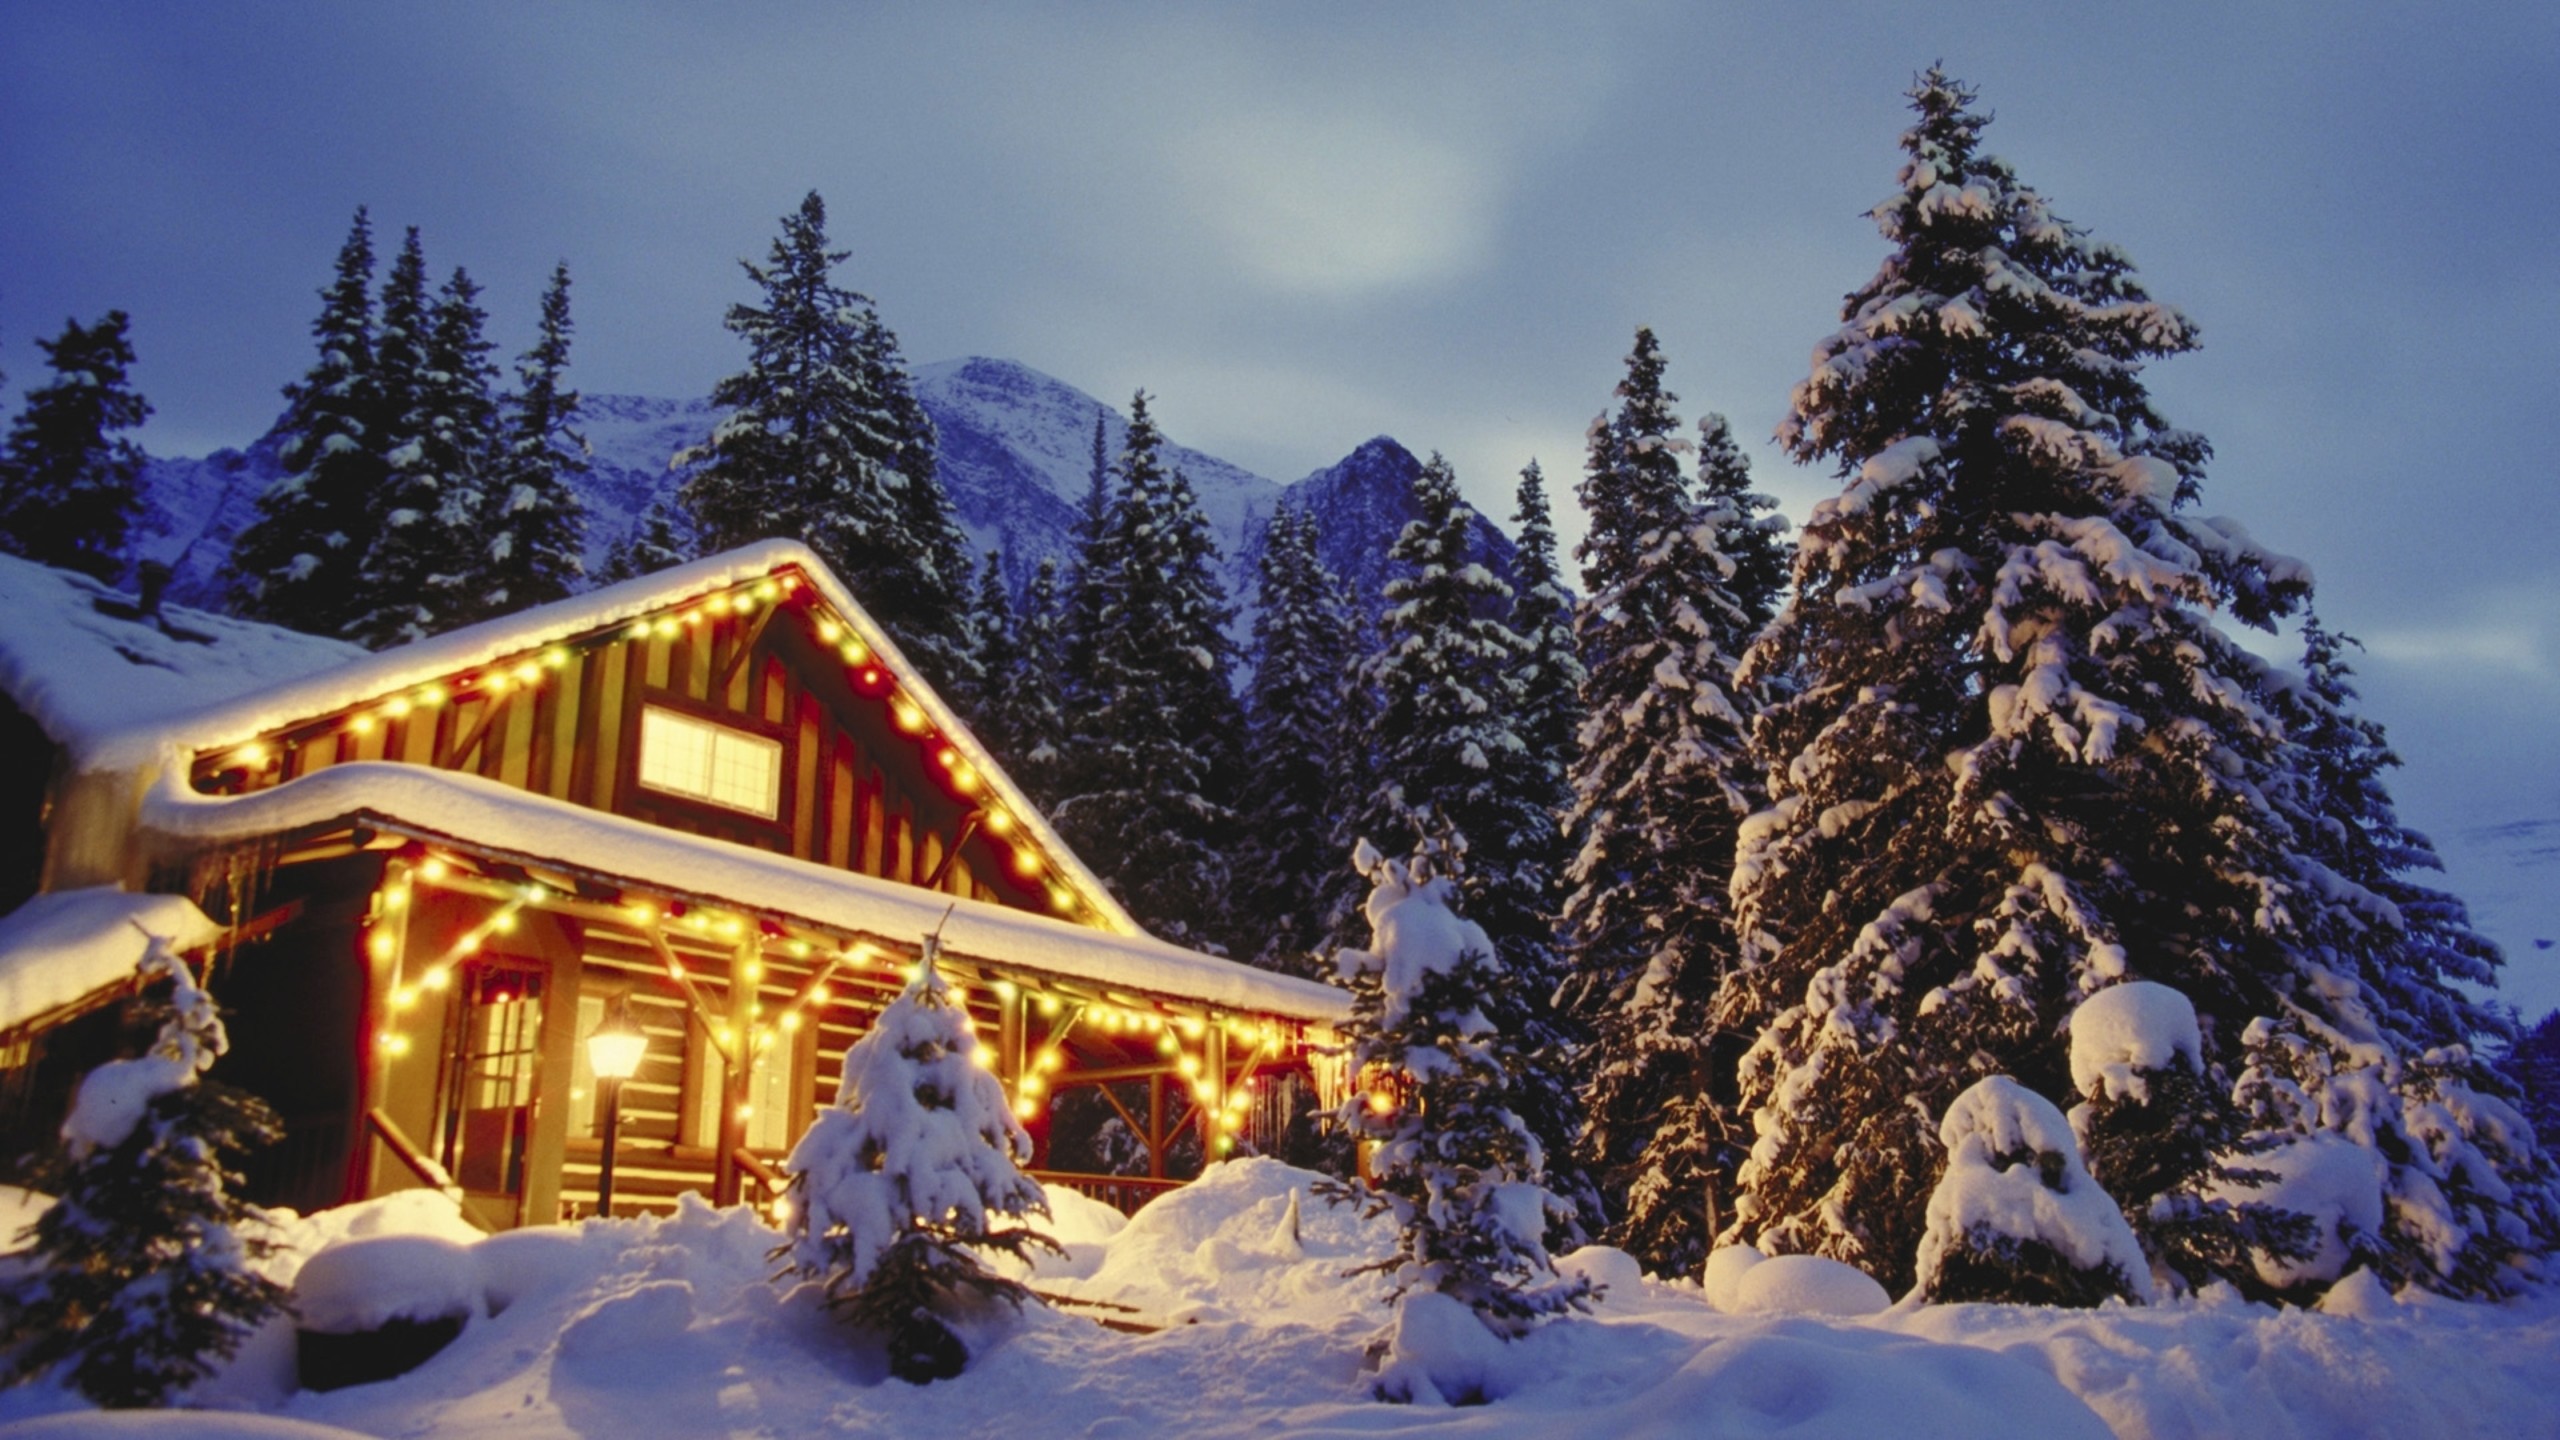 2560x1440 free Woods Christmas wallpaper, resolution : 1920 x tags: Woods, Christmas,  Colorado, Cabin.